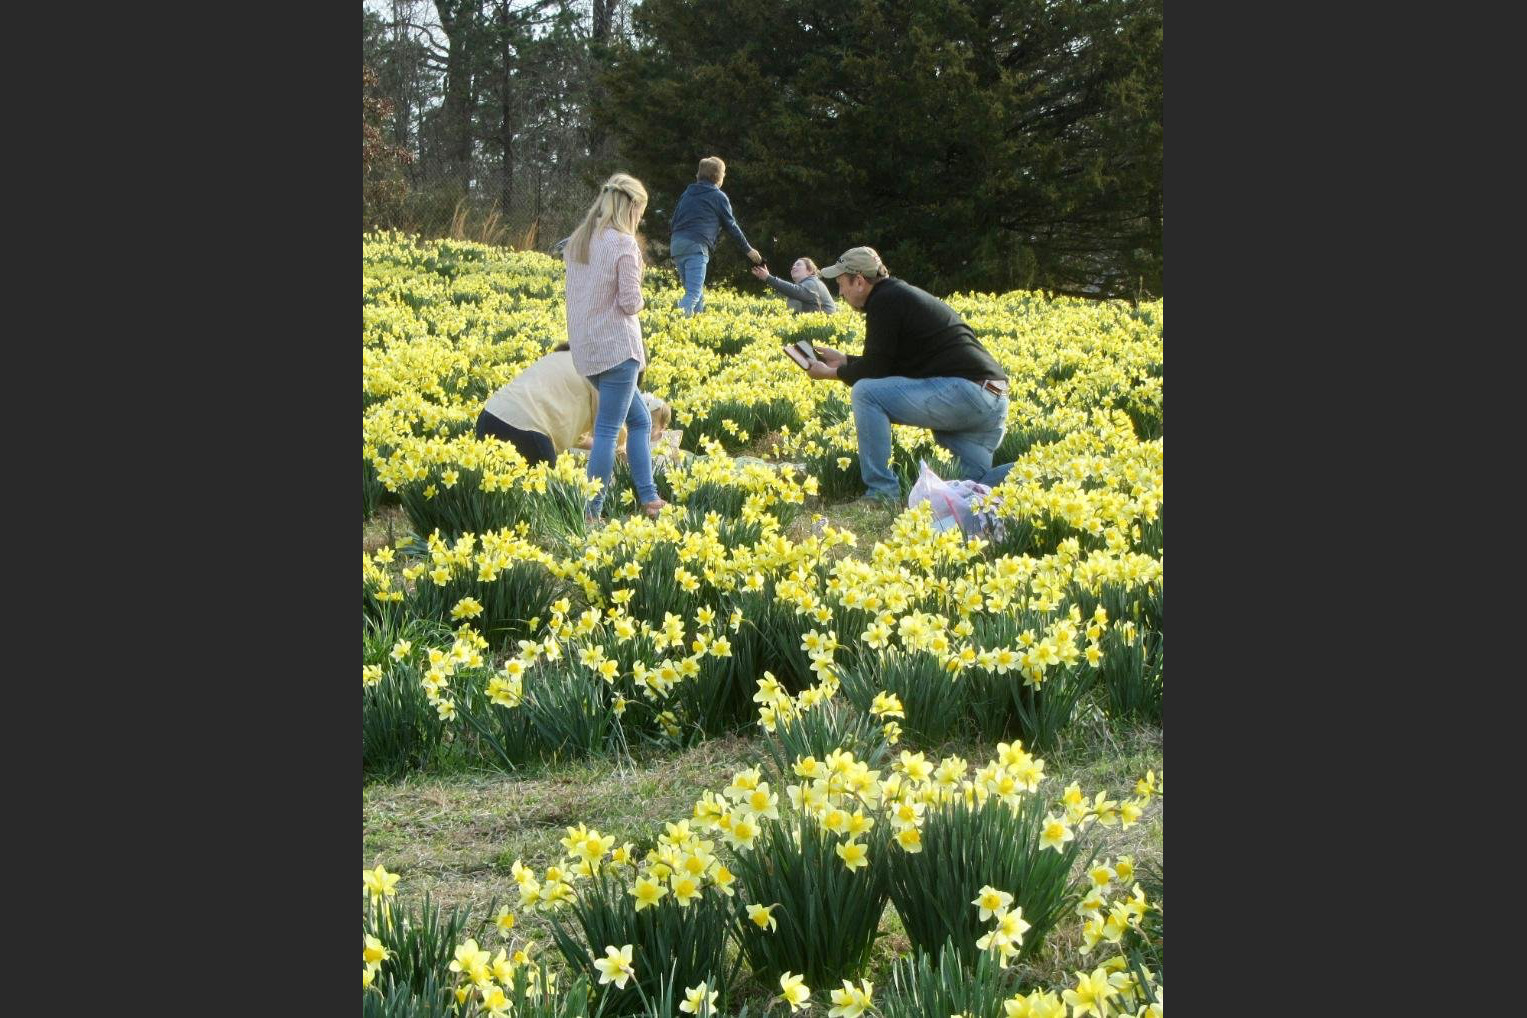 ARKANSAS SIGHTSEEING Resilient daffodils expected to bounce back after